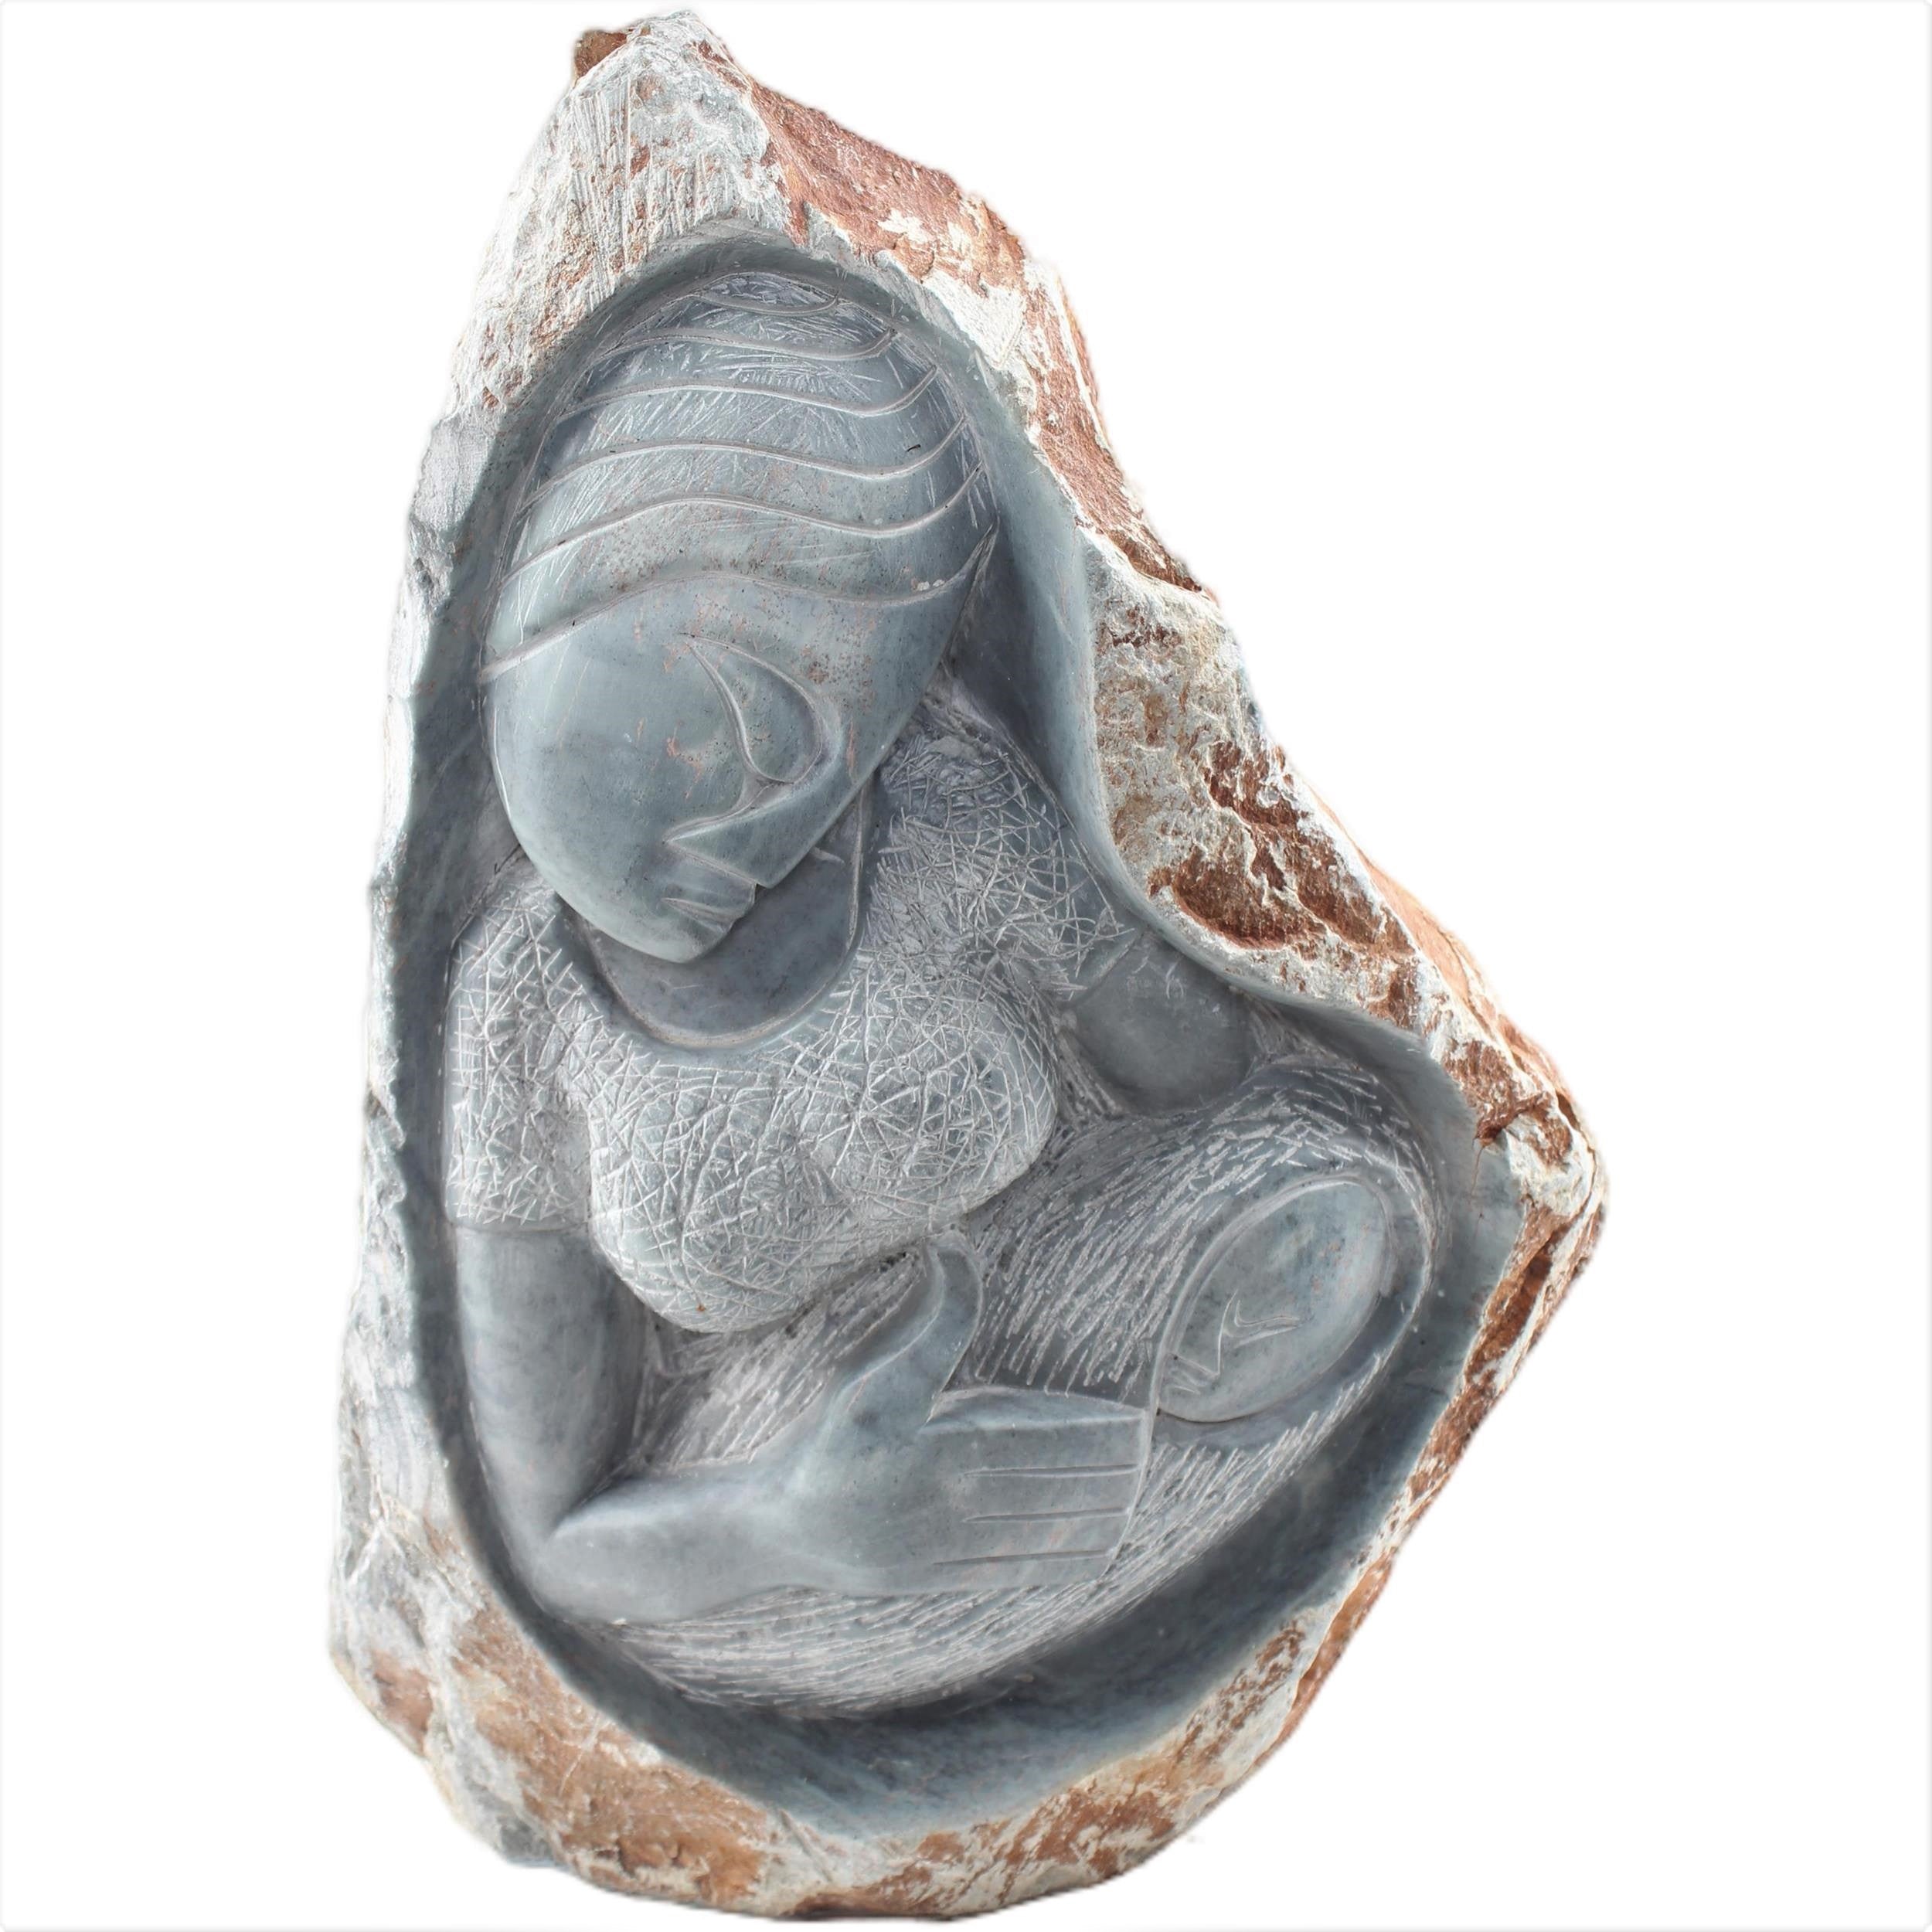 Shona Tribe Serpentine Stone Mother and Child ~16.9" Tall